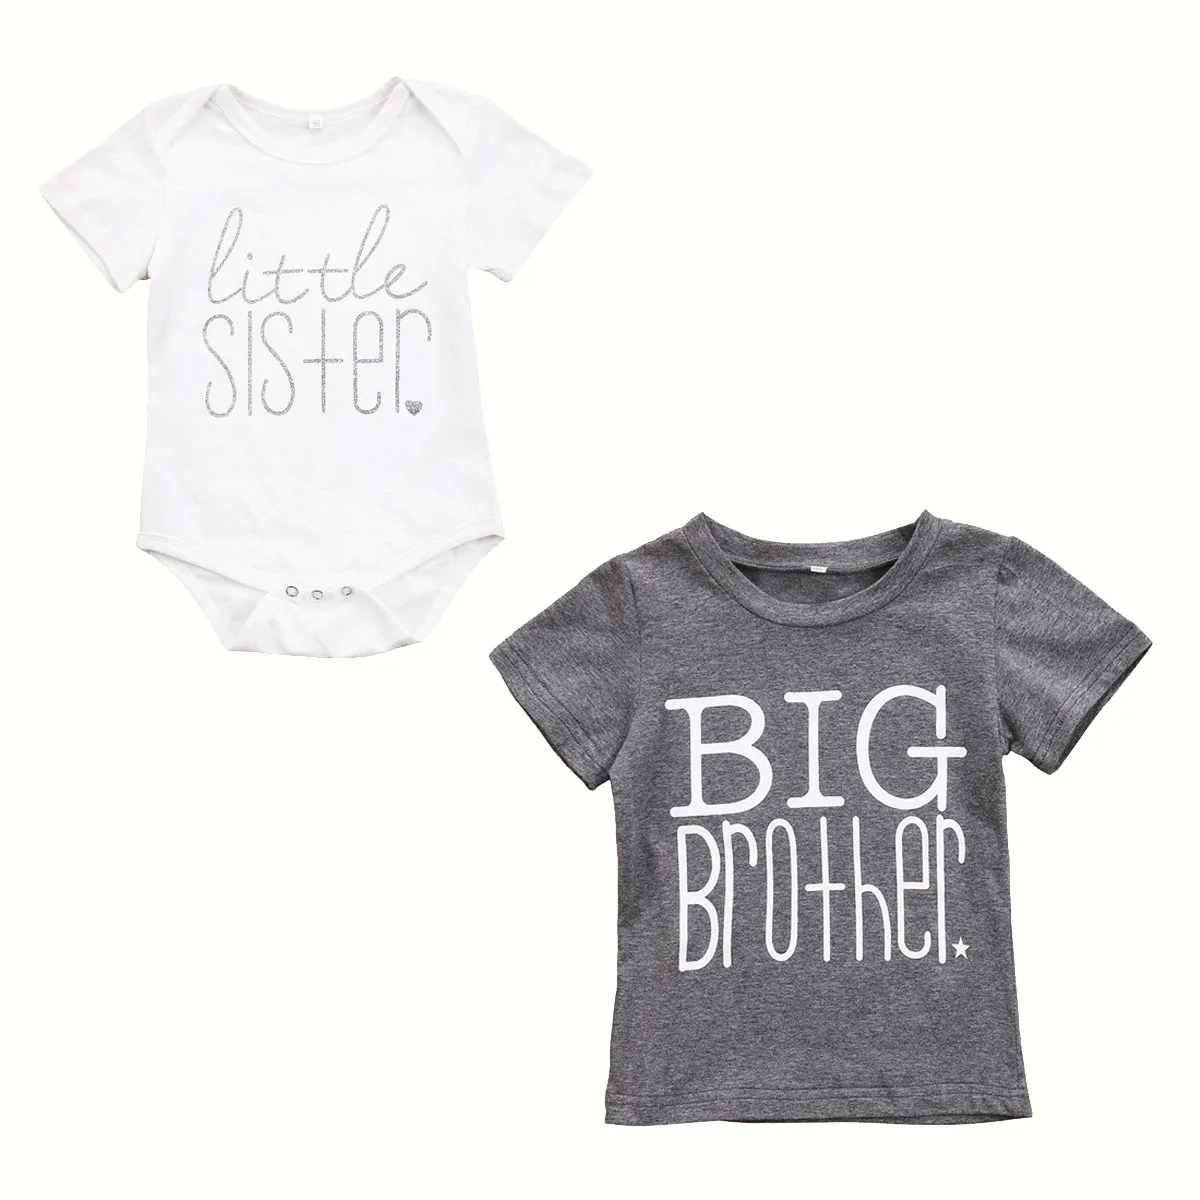 Borther And Sister Matching Clthoes Fynny Big Brother T-shirt Little Sister Cotton Bodysuit Short Sleeve Letter Tops